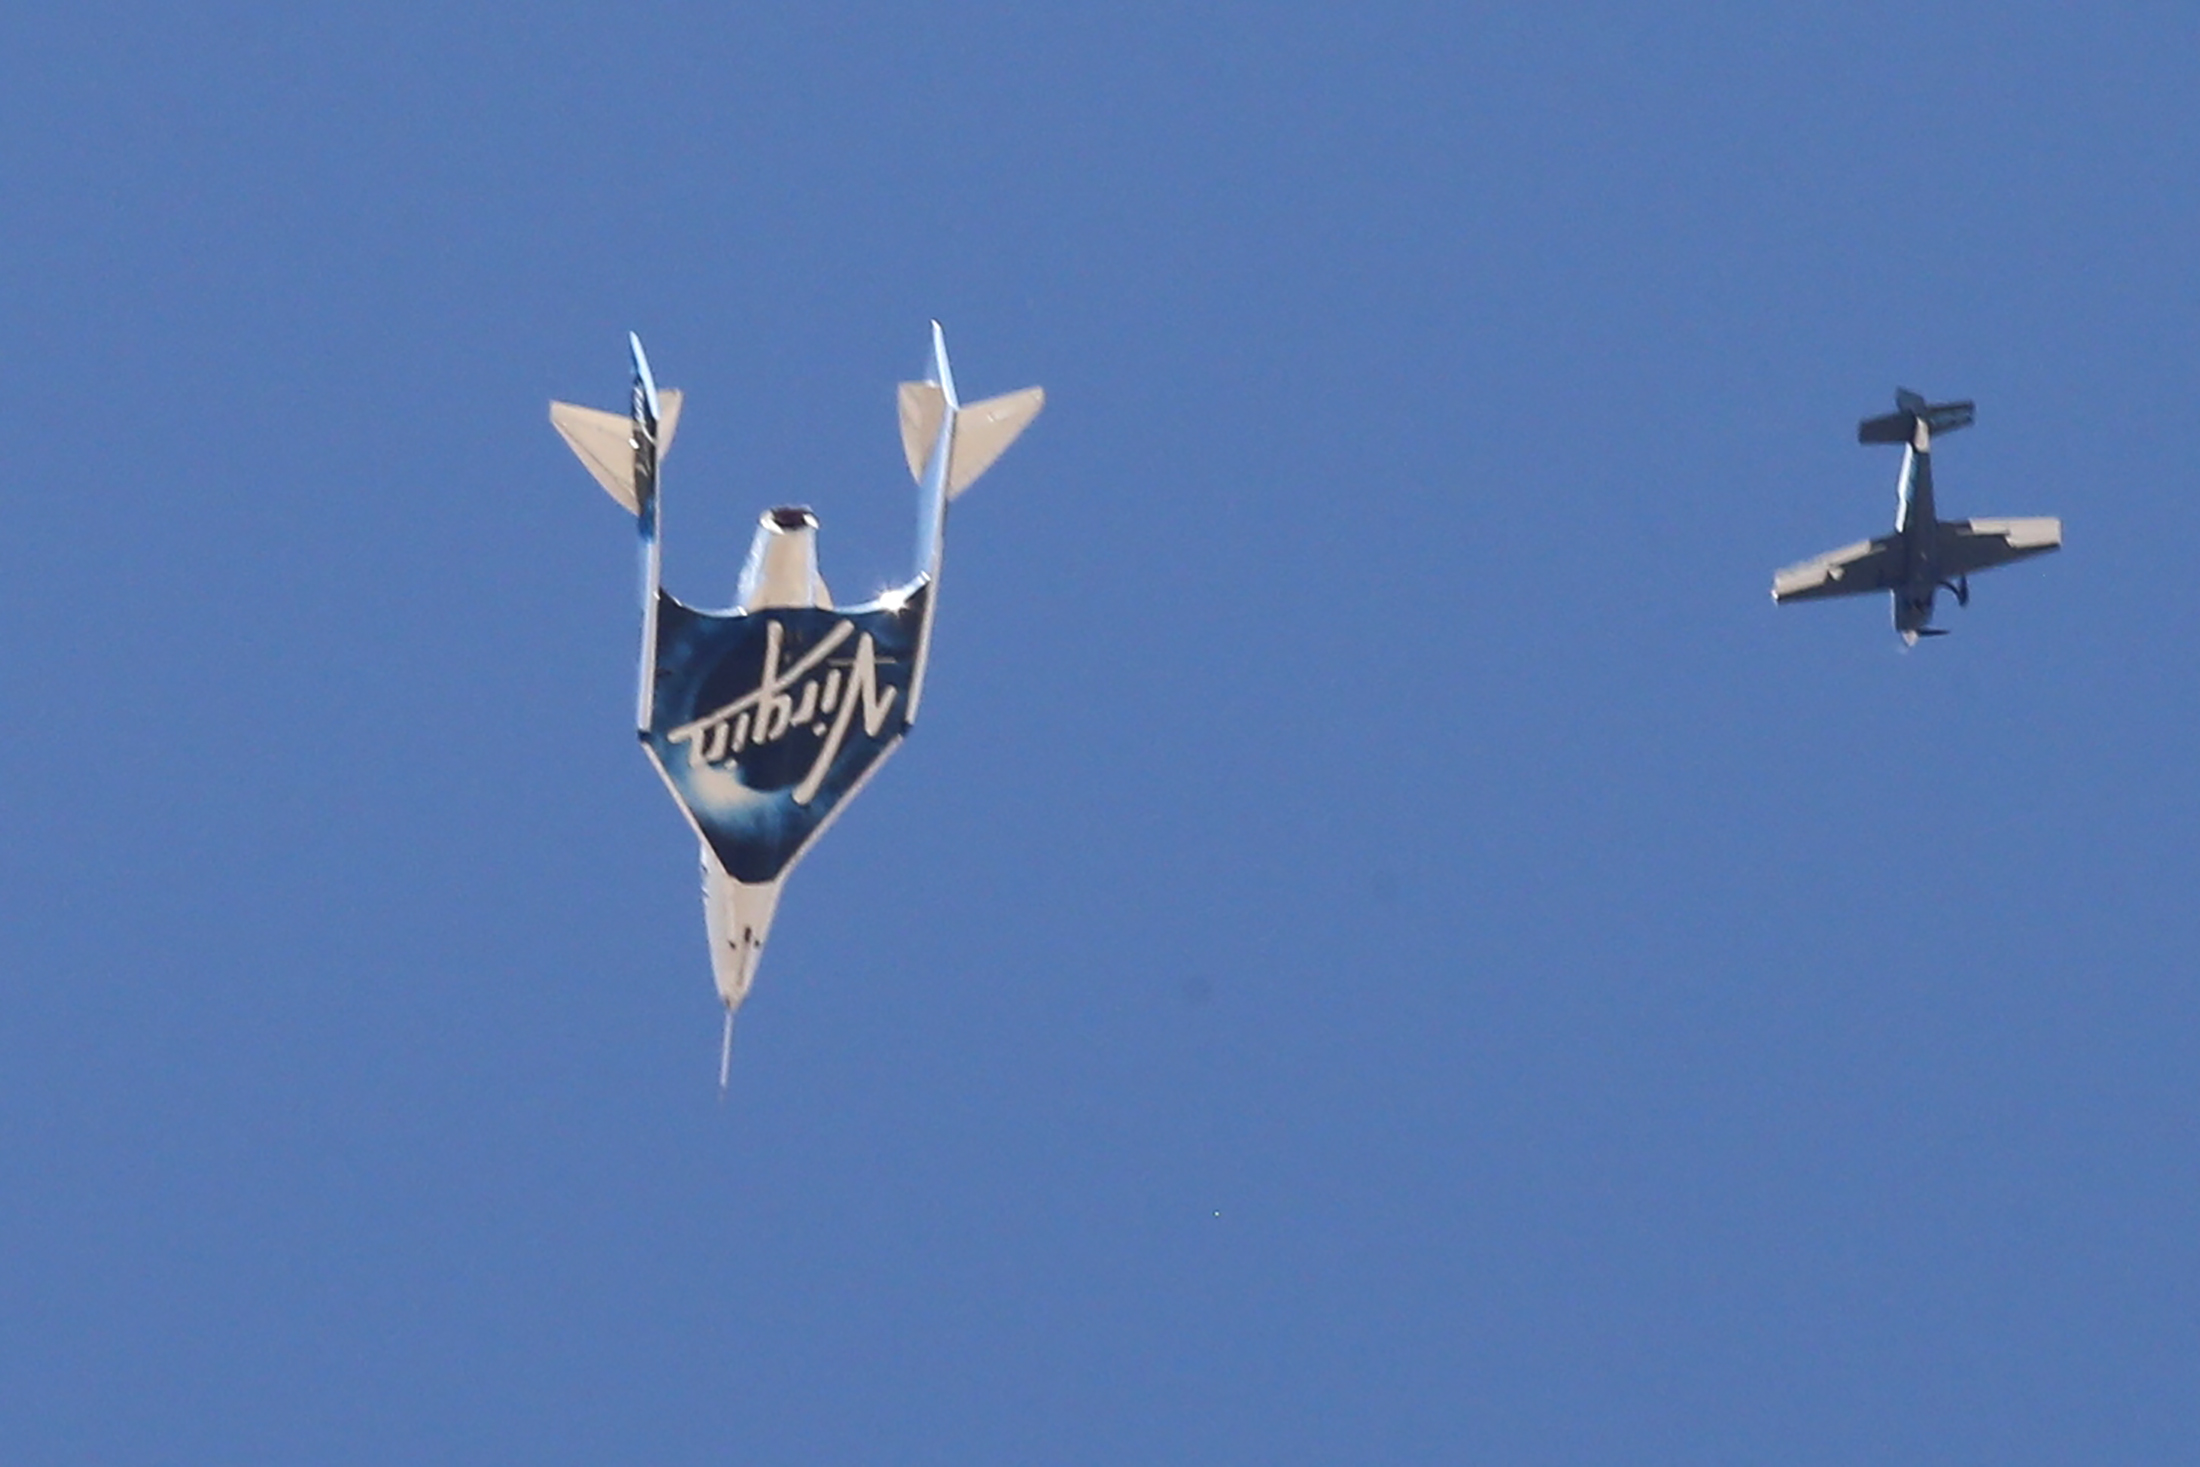 Virgin Galactic's passenger rocket plane VSS Unity descends after reaching the edge of space above Spaceport America